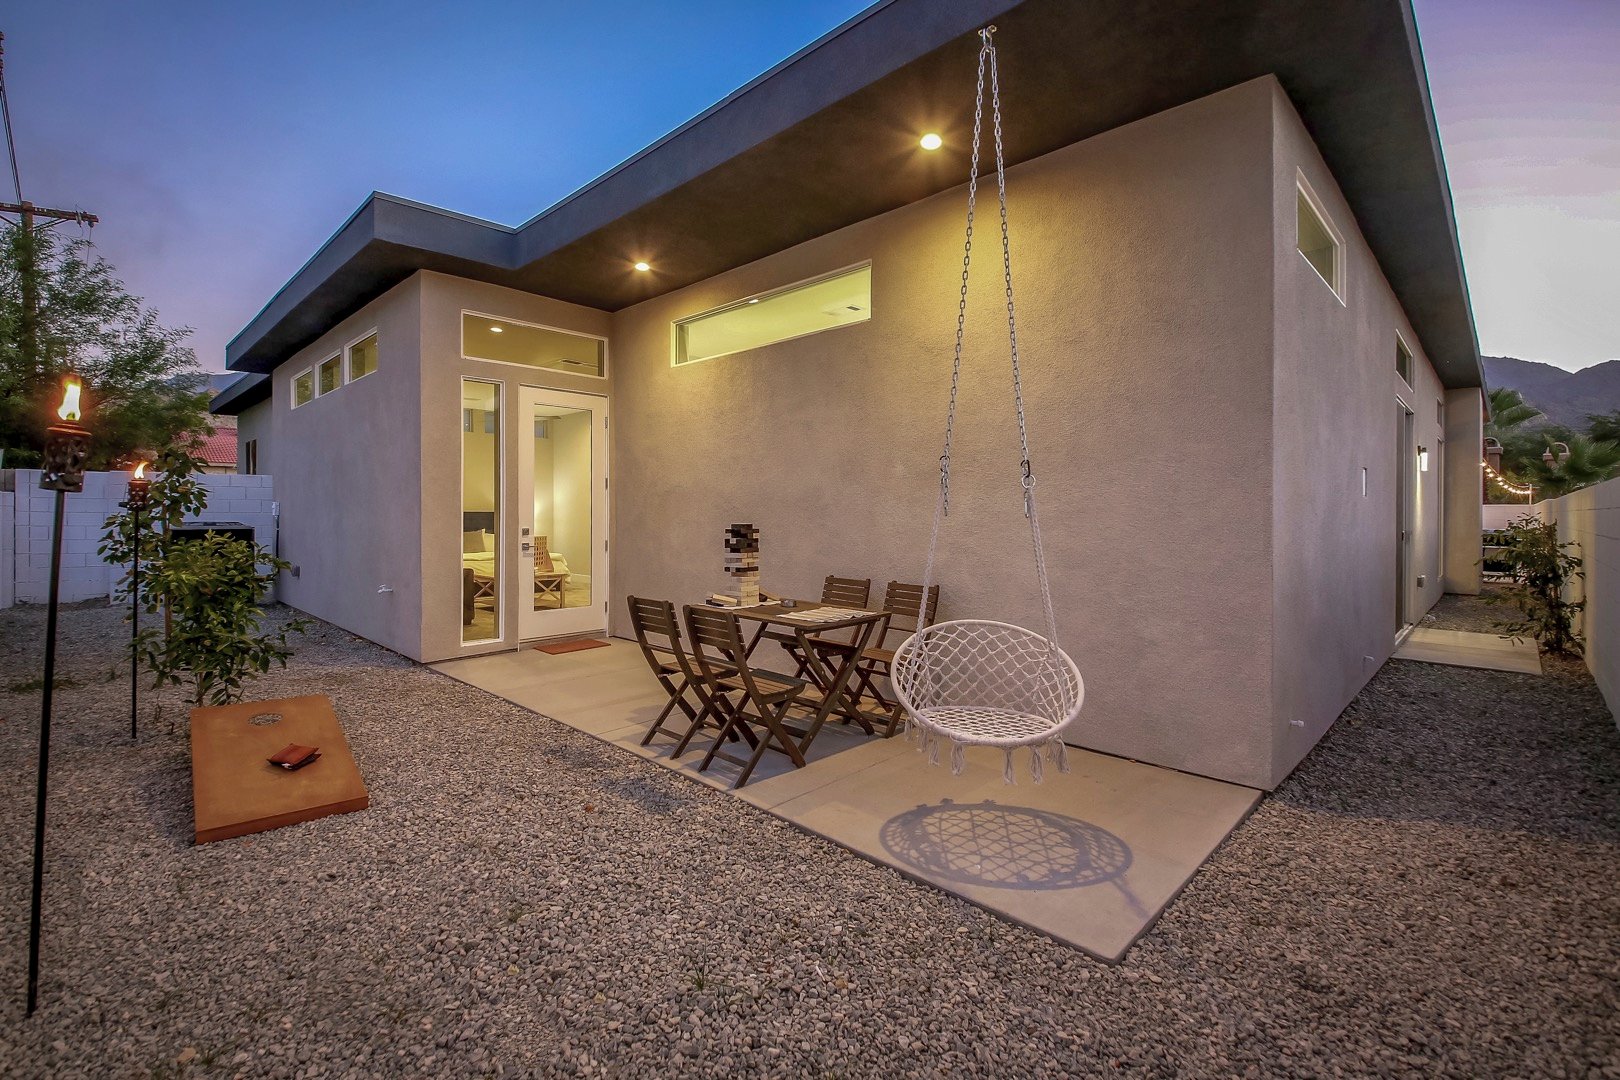 The back patio features a bean bag toss game, swing chair and seating for 4.